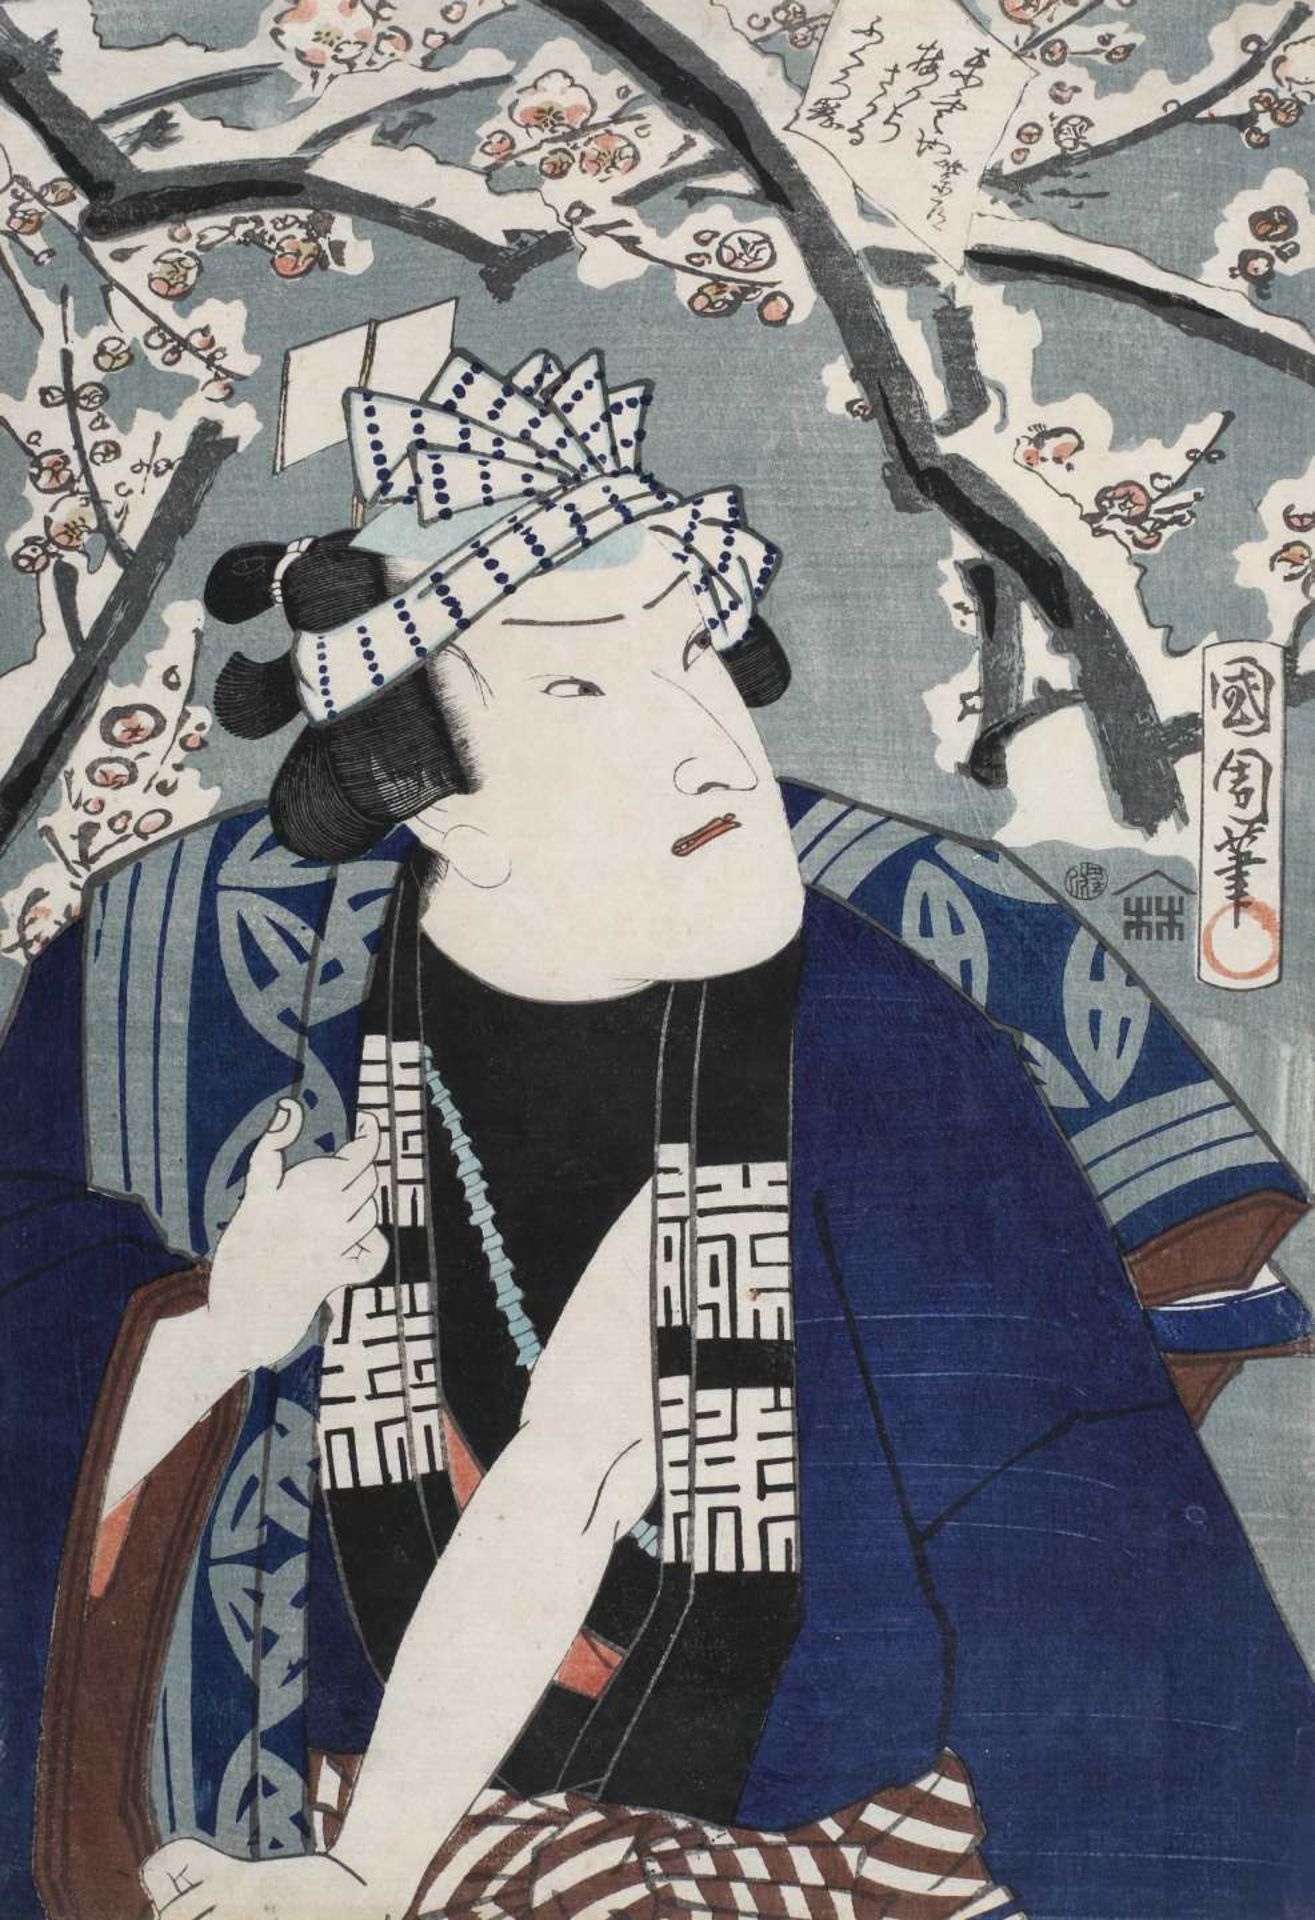 Toyohara Kunichika, Actor Shido (Otani Tomoemon V), from the series "Seven poems for good luck at s